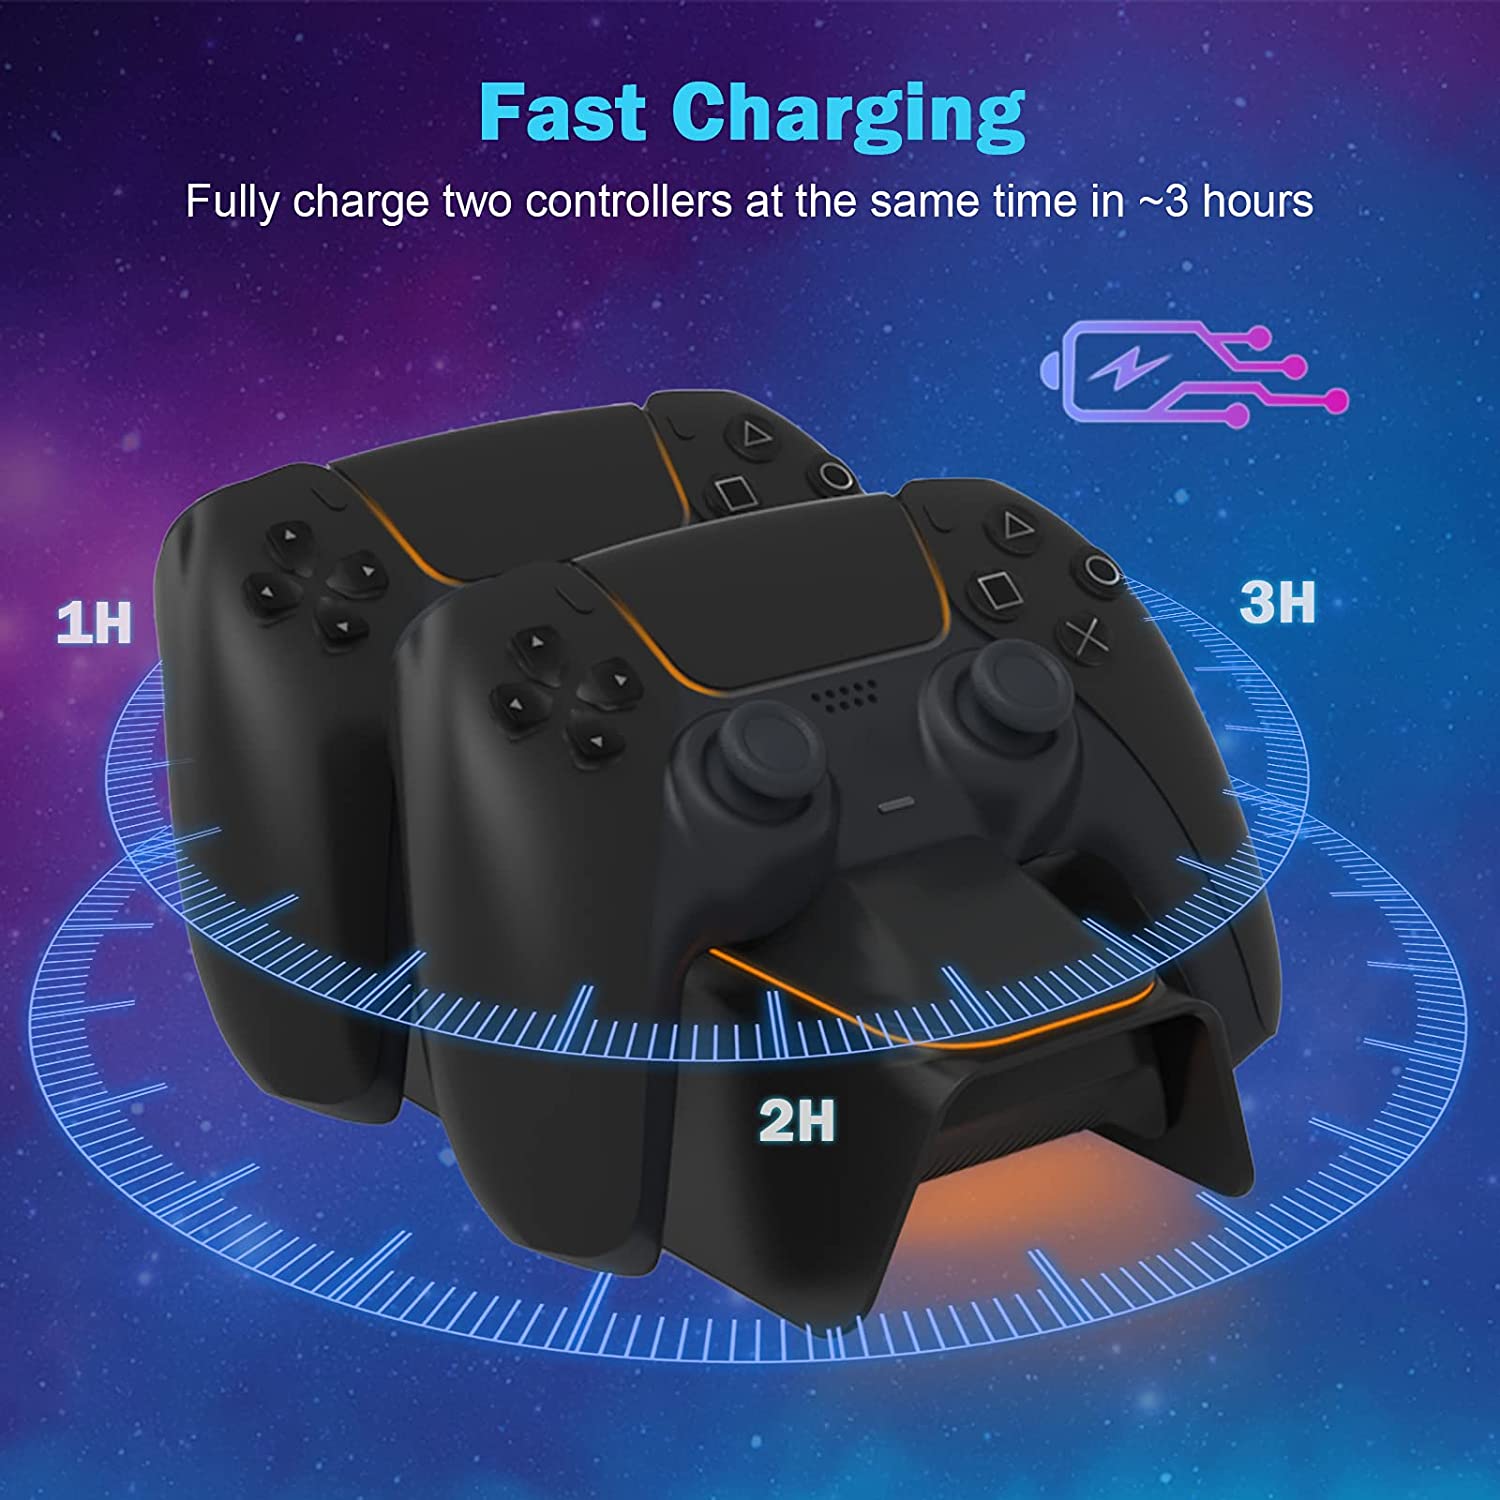 Charging station can quickly charge 2 controllers fully within 3 hours.